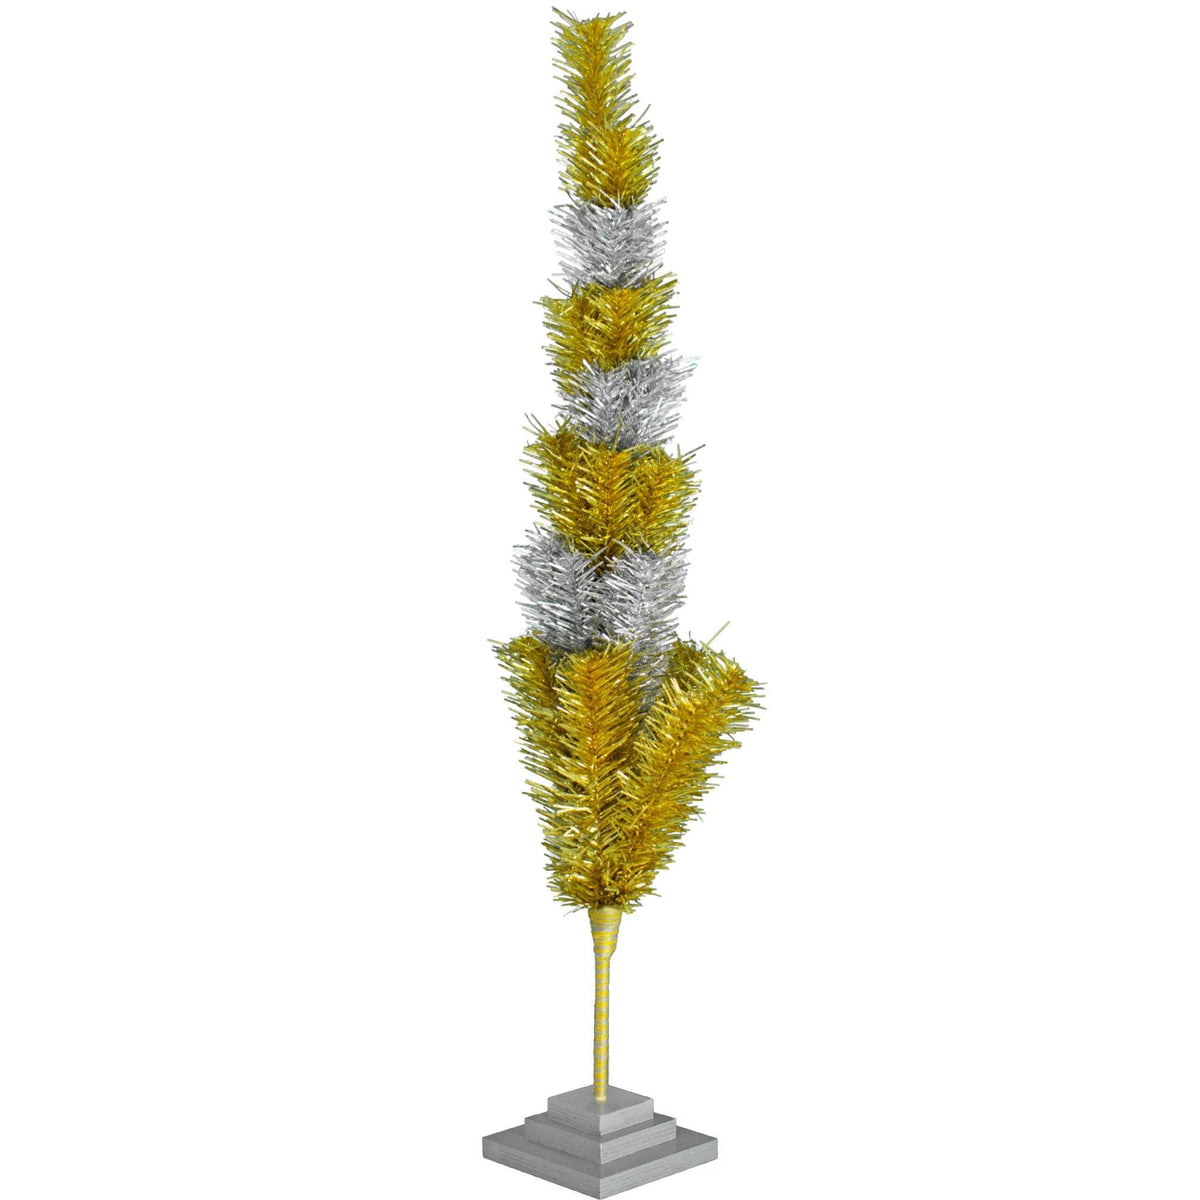 36in tall Shiny Gold and Metallic Silver Layered Tinsel Christmas Trees on sale at leedisplay.com